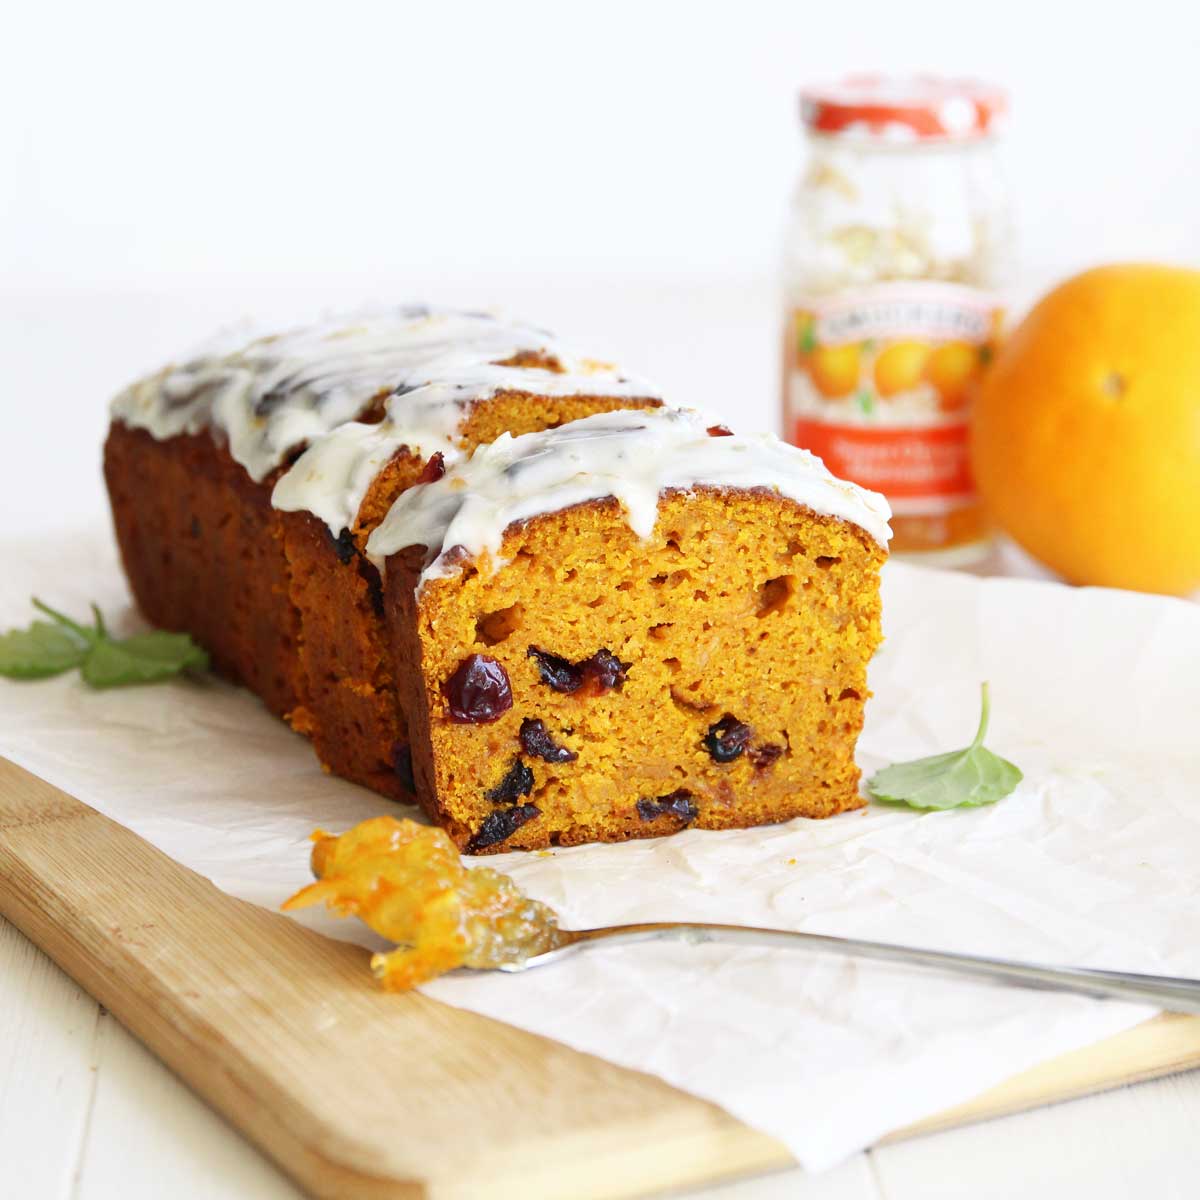 Cranberry Pumpkin Bread with Simple Orange Marmalade Glaze - Peppermint Whipped Cream